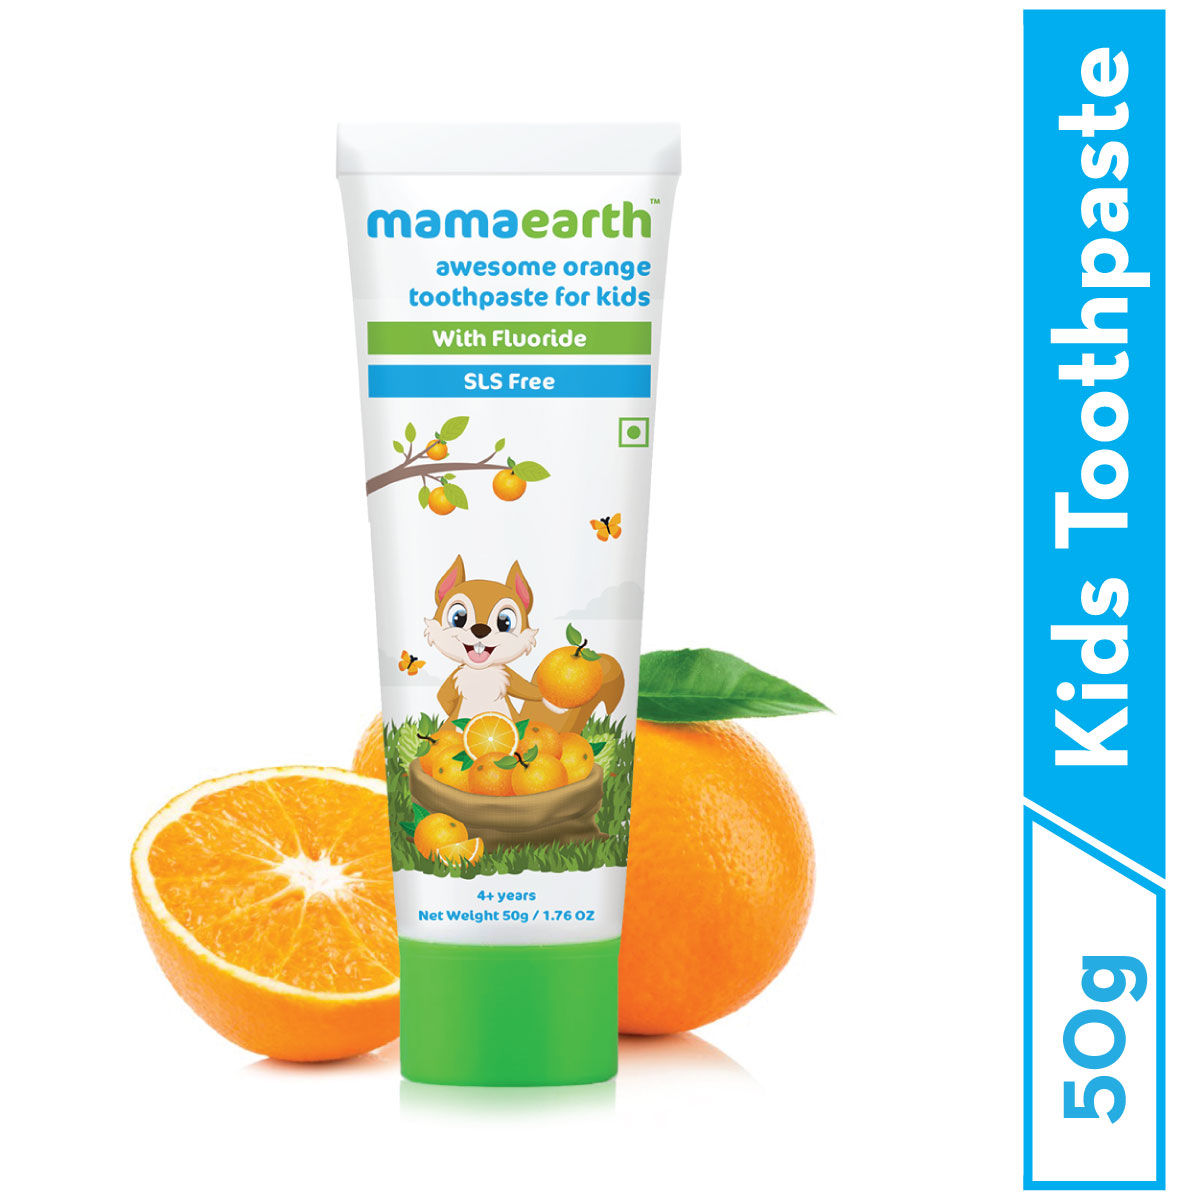 Mama earth orange toothpaste for kids 50g MRP 149/-